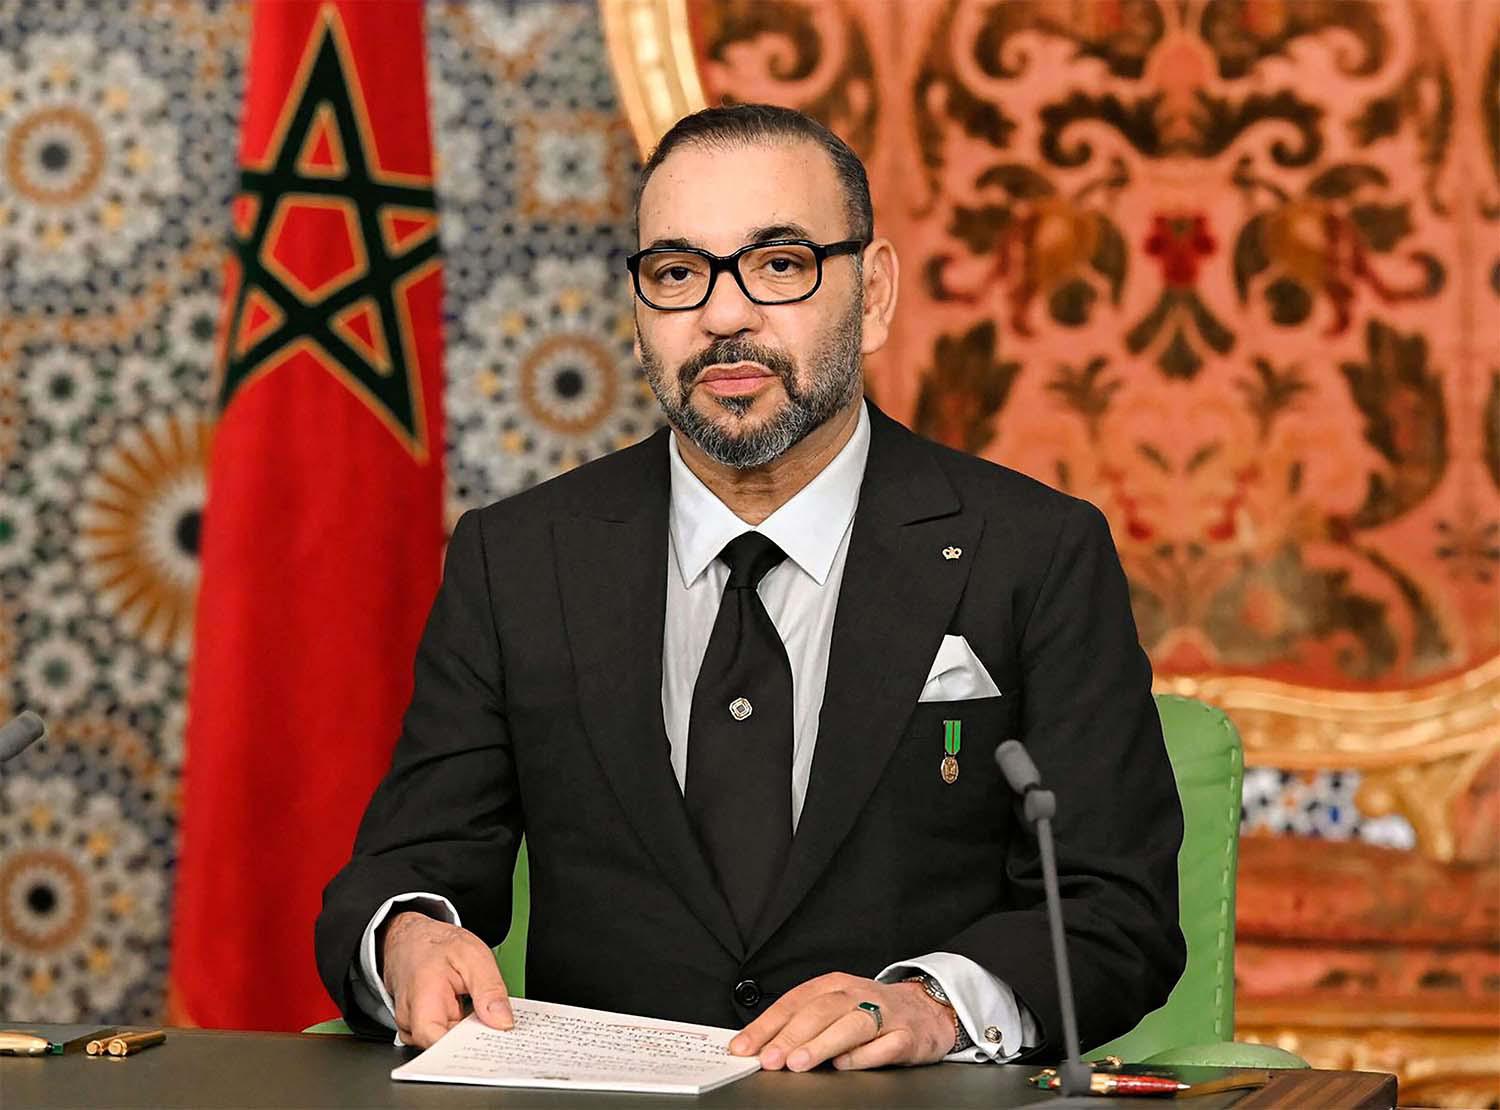 King Mohammed VI expressed his full support for the Palestinian National Authority